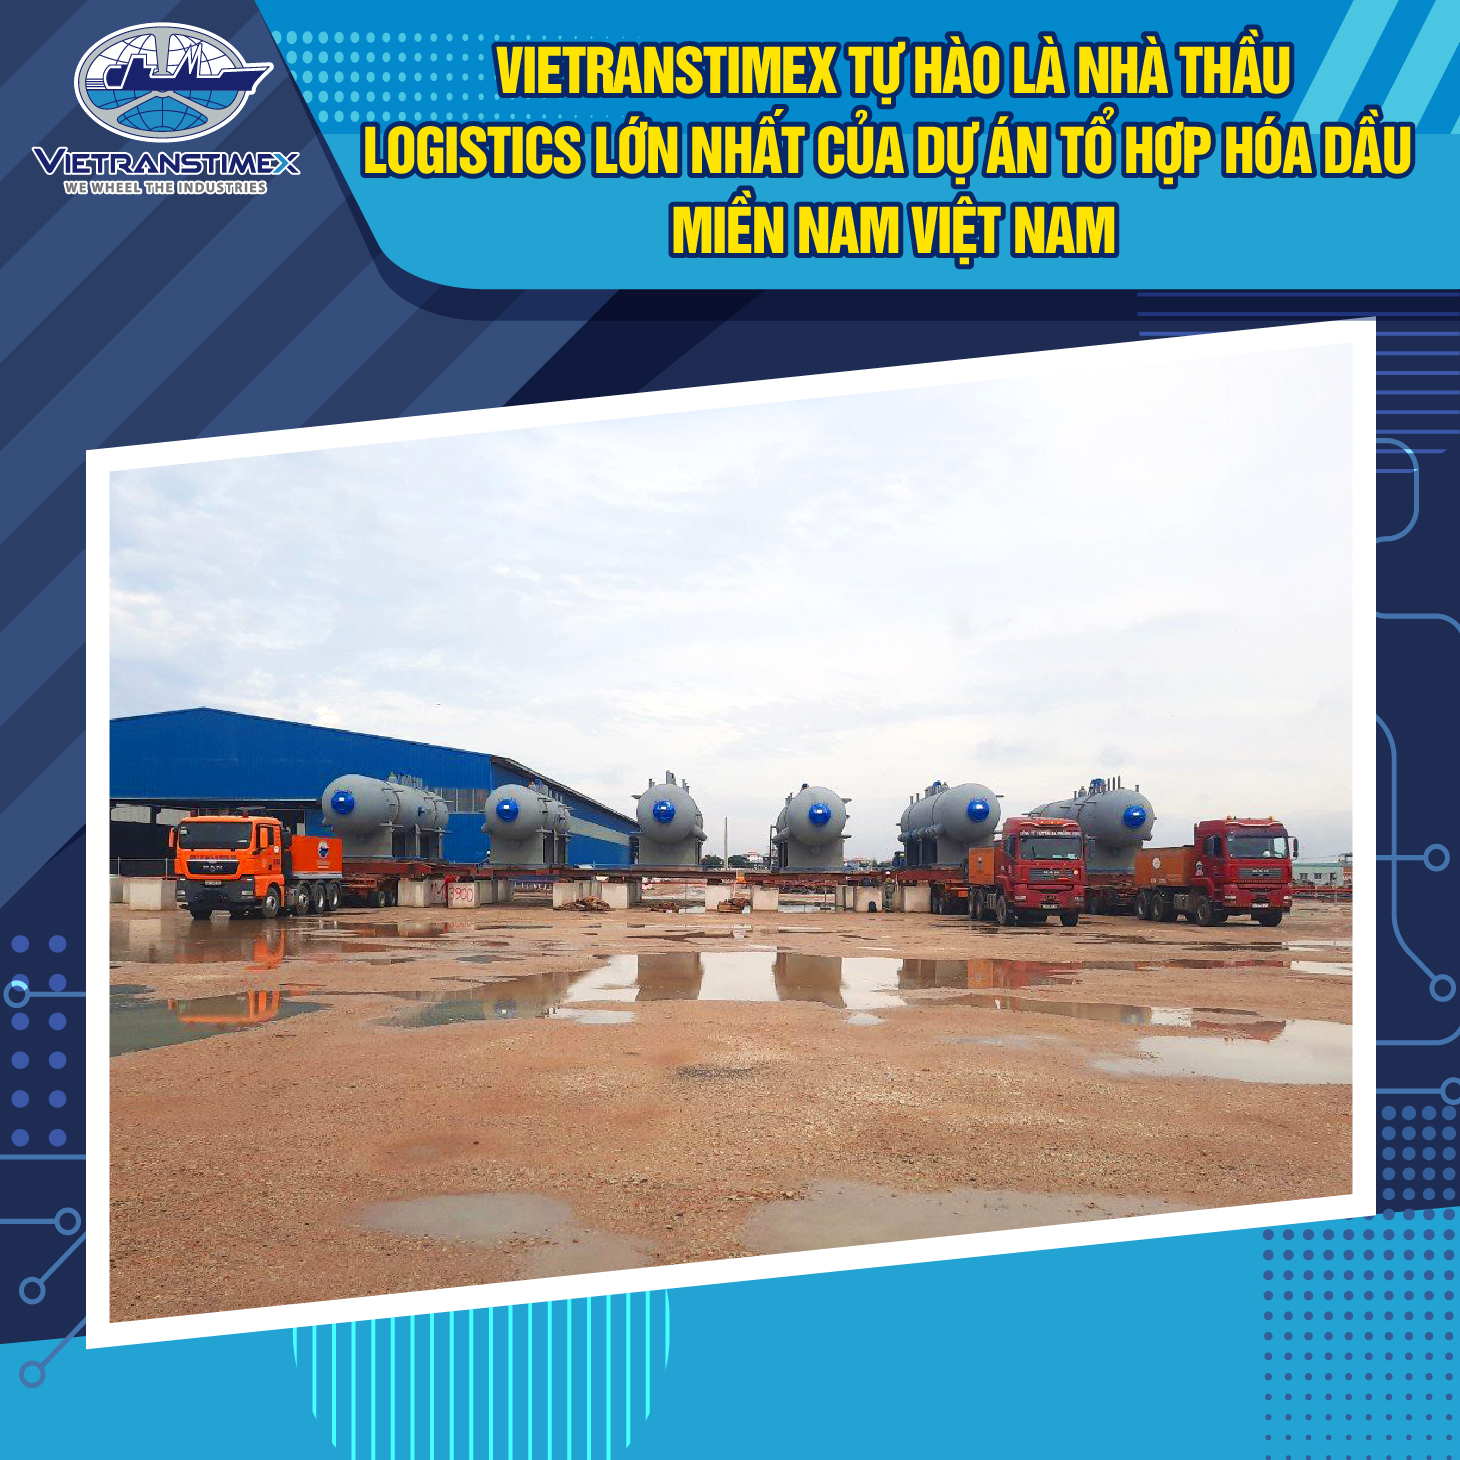 Vietranstimex Is Proud To Be The Biggest Logistics Contractor Of The Petrochemical Complex In The South Of Vietnam Project